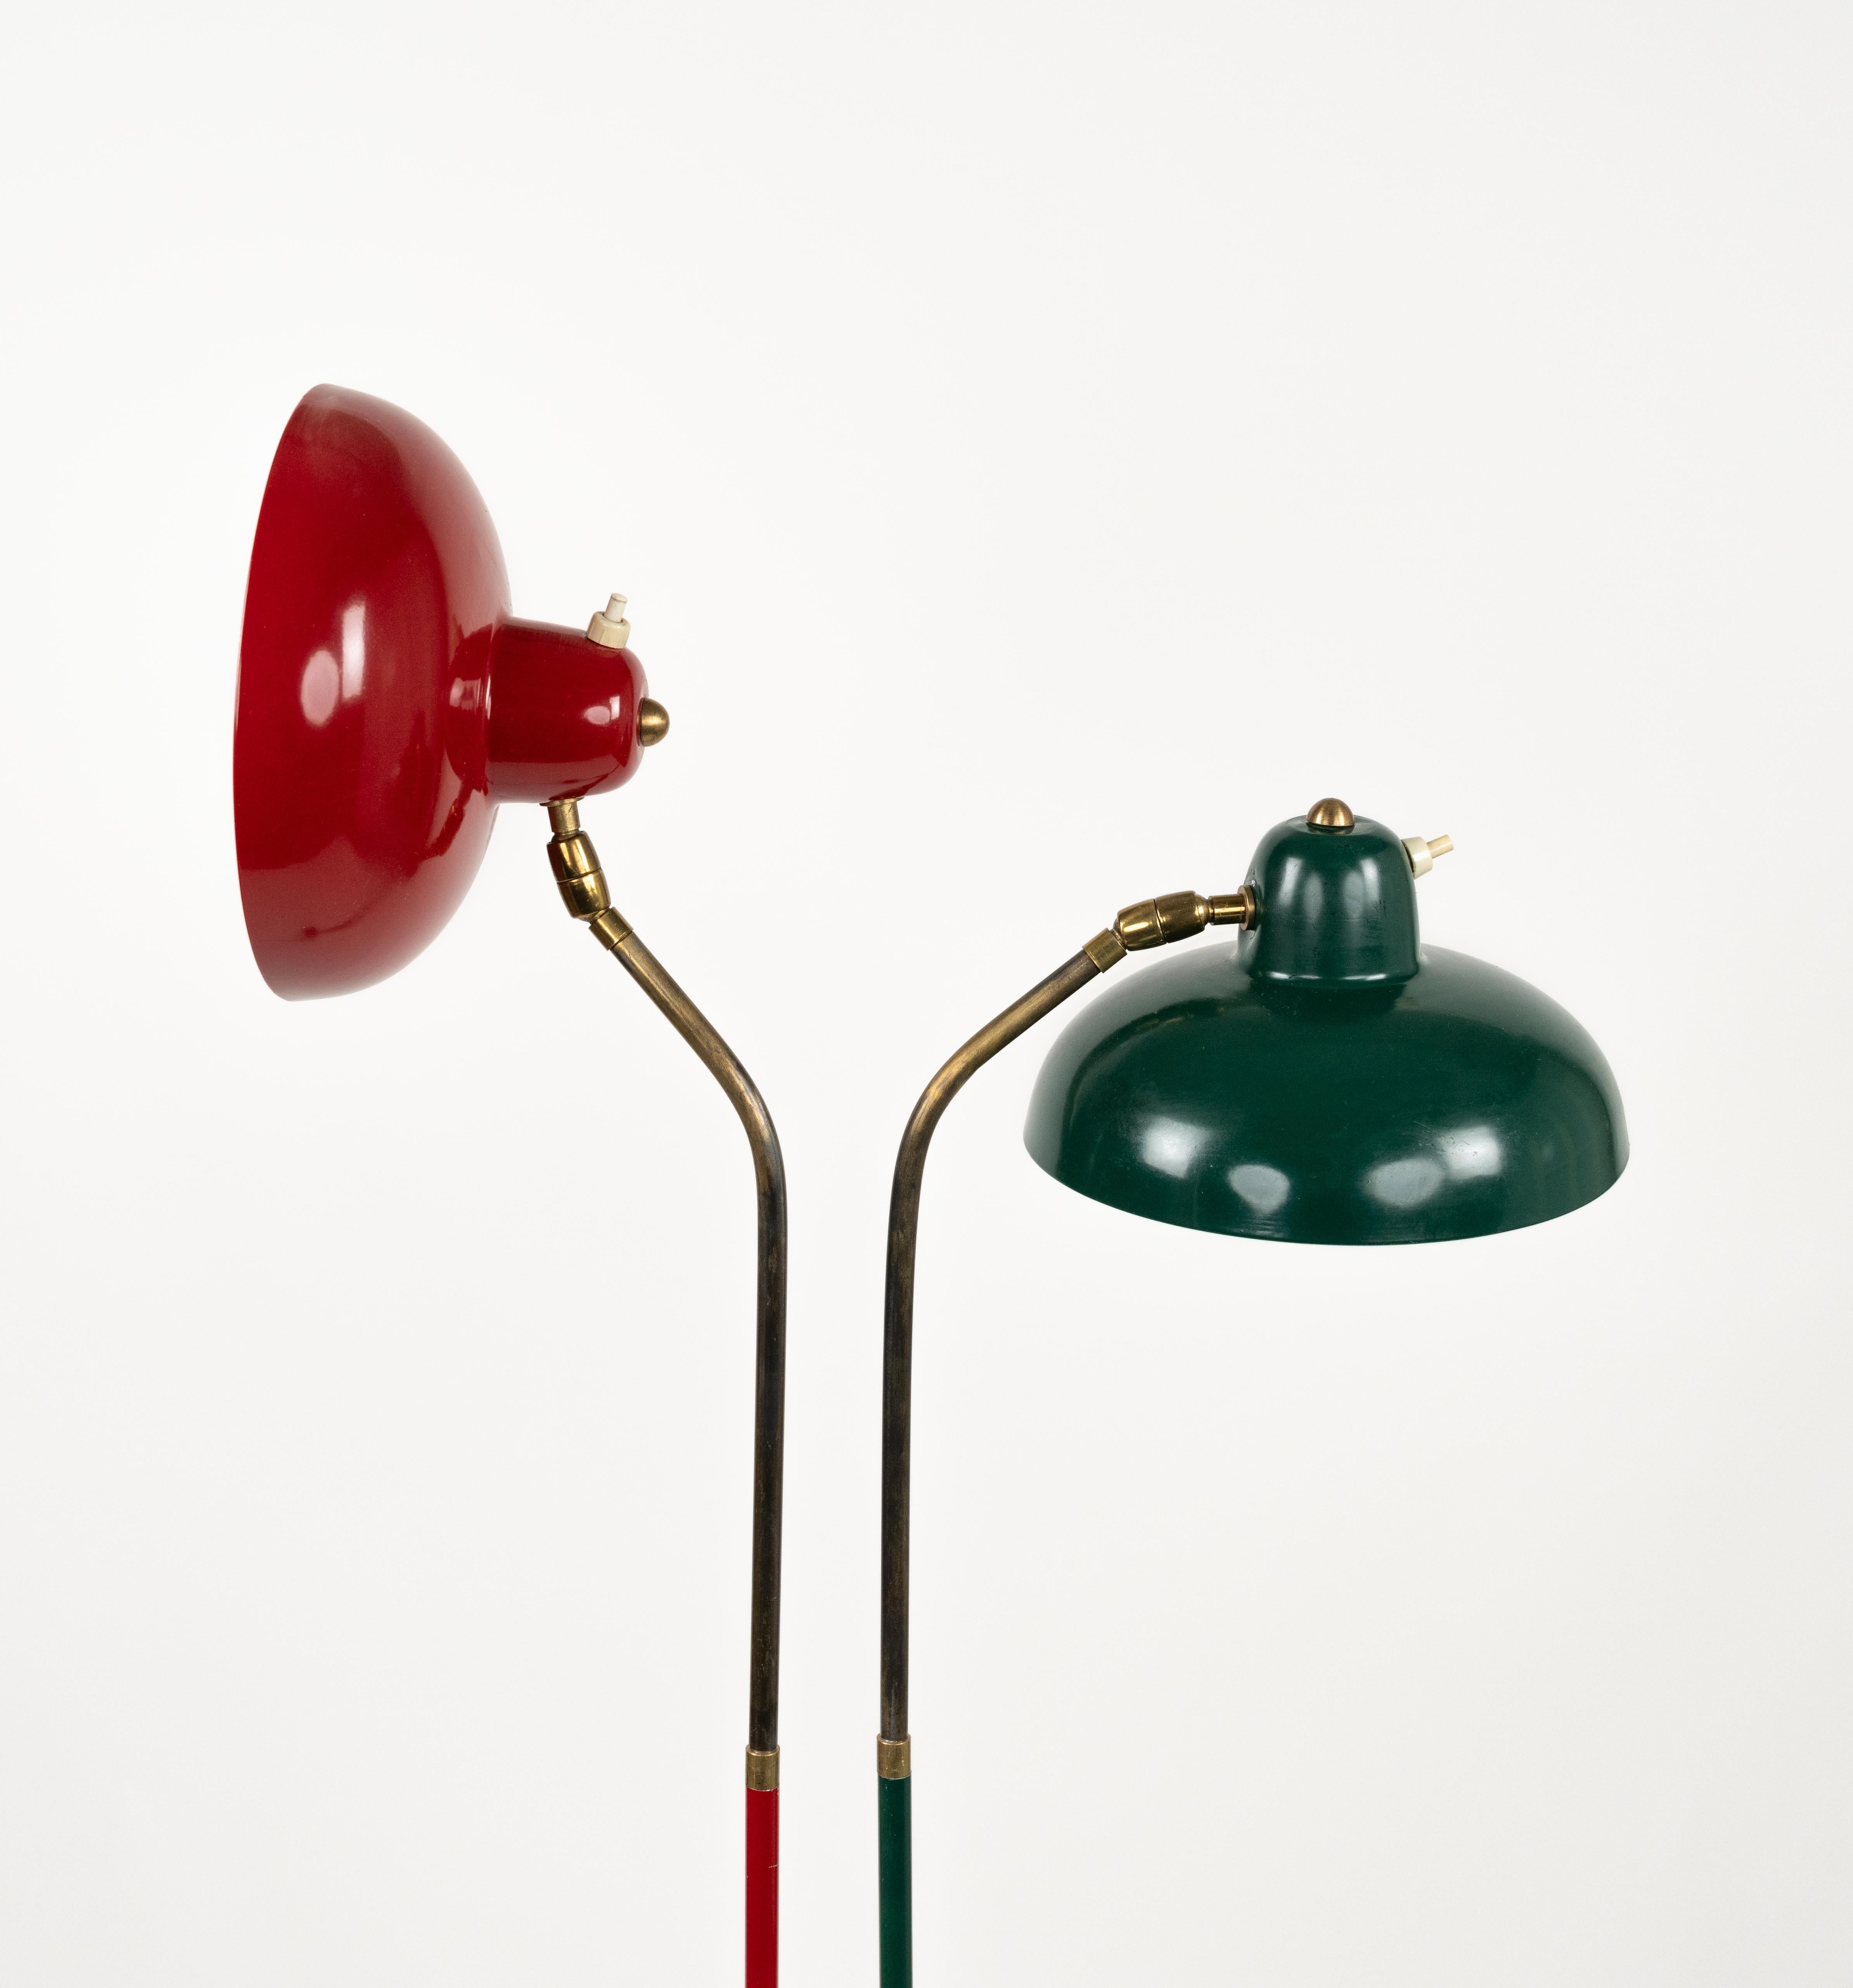 Floor Lamp in Marble, Lacquered Metal and Brass Stilnovo Style, Italy 1950s For Sale 7